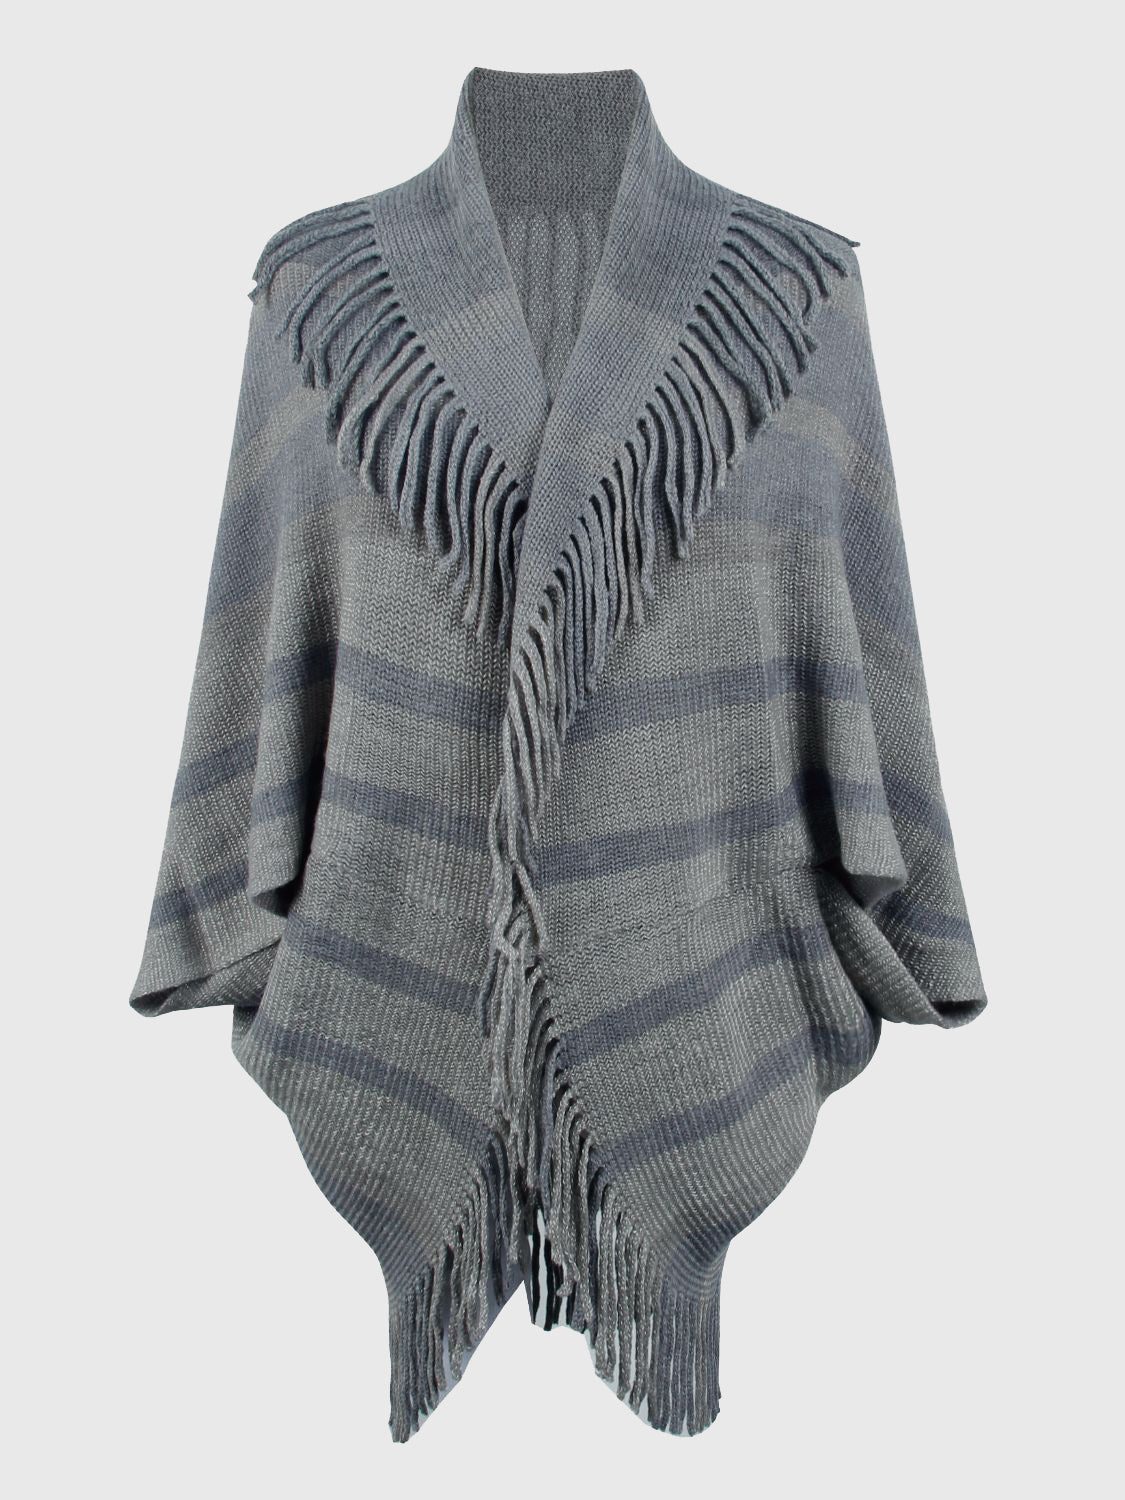 Fringe Detail Open Front Poncho Charcoal One Size